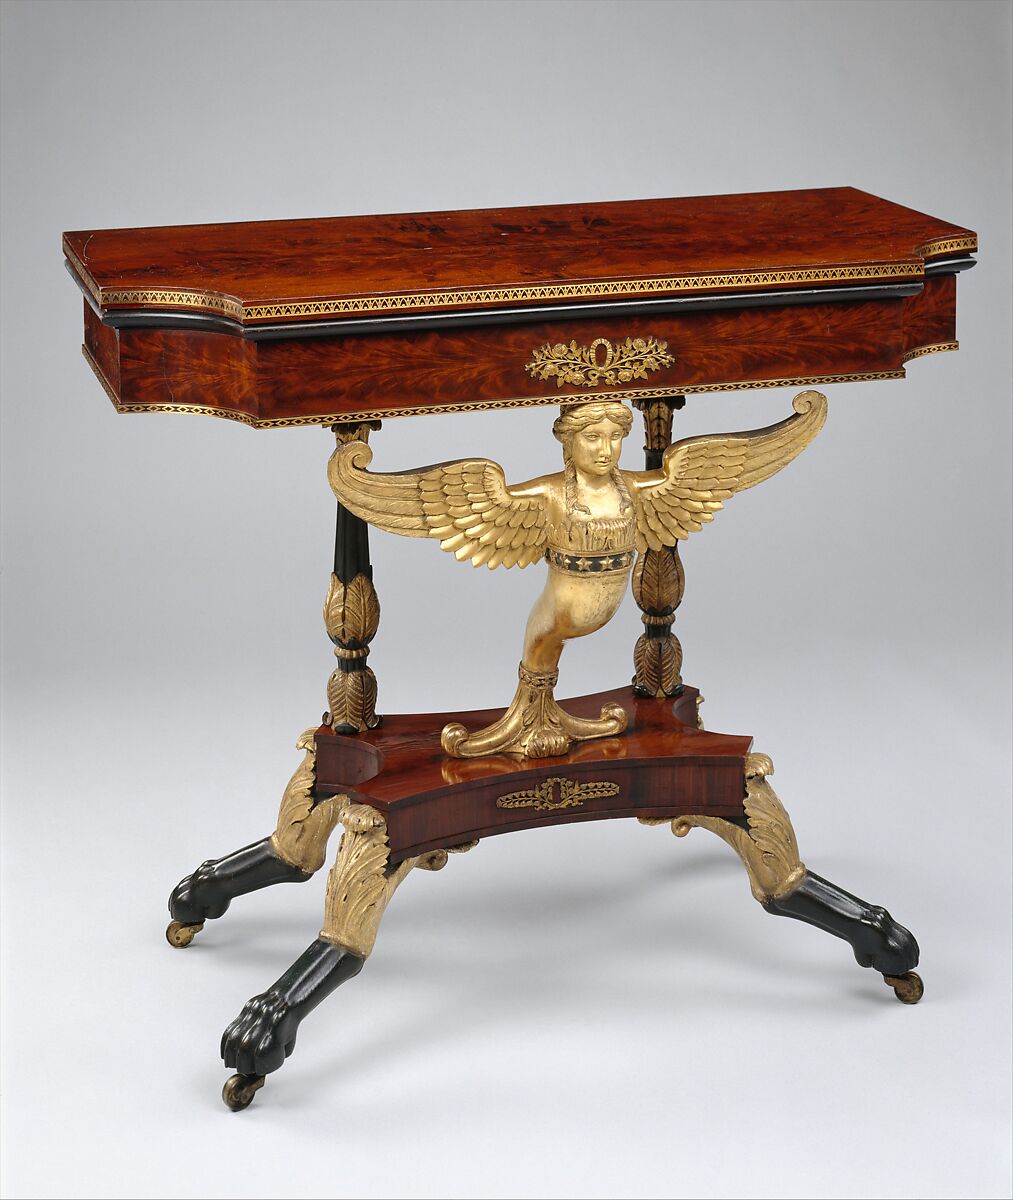 Card table, Charles-Honoré Lannuier (France 1779–1819 New York), Mahogany veneer, white pine, yellow poplar, gilded gesso, vert antique, and gilded brass, American 